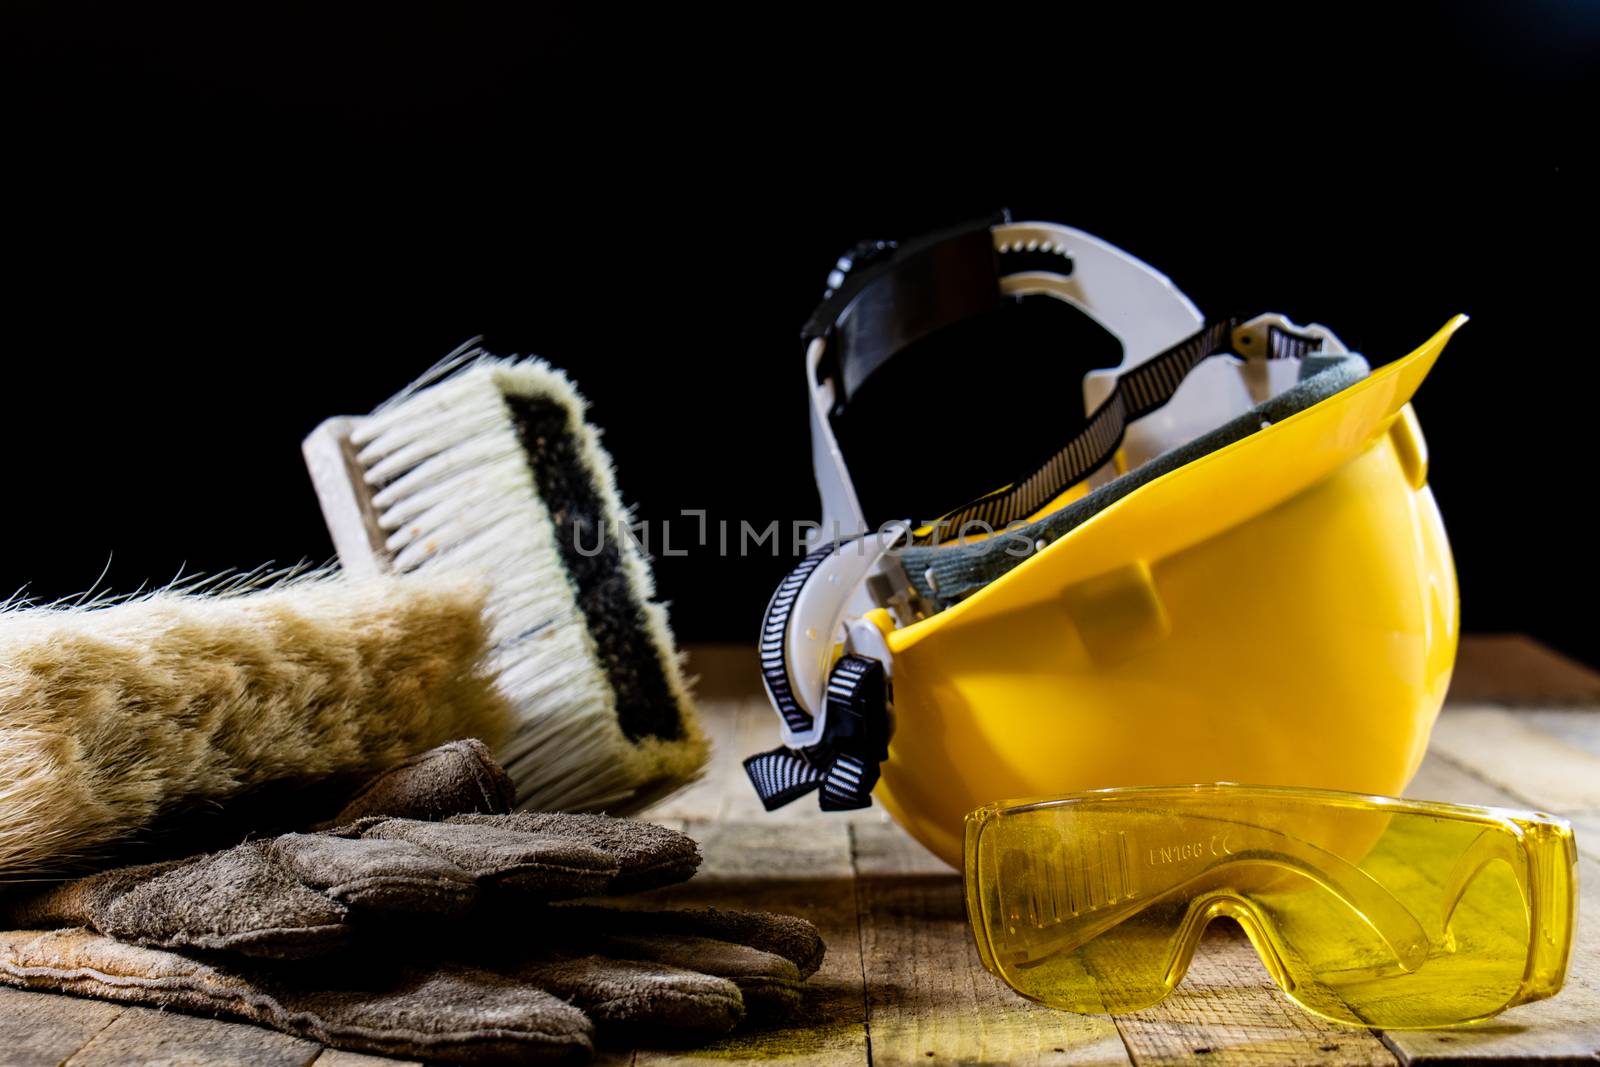 Yellow helmet and carpenter tools. Carpenter and old wooden table. Black background